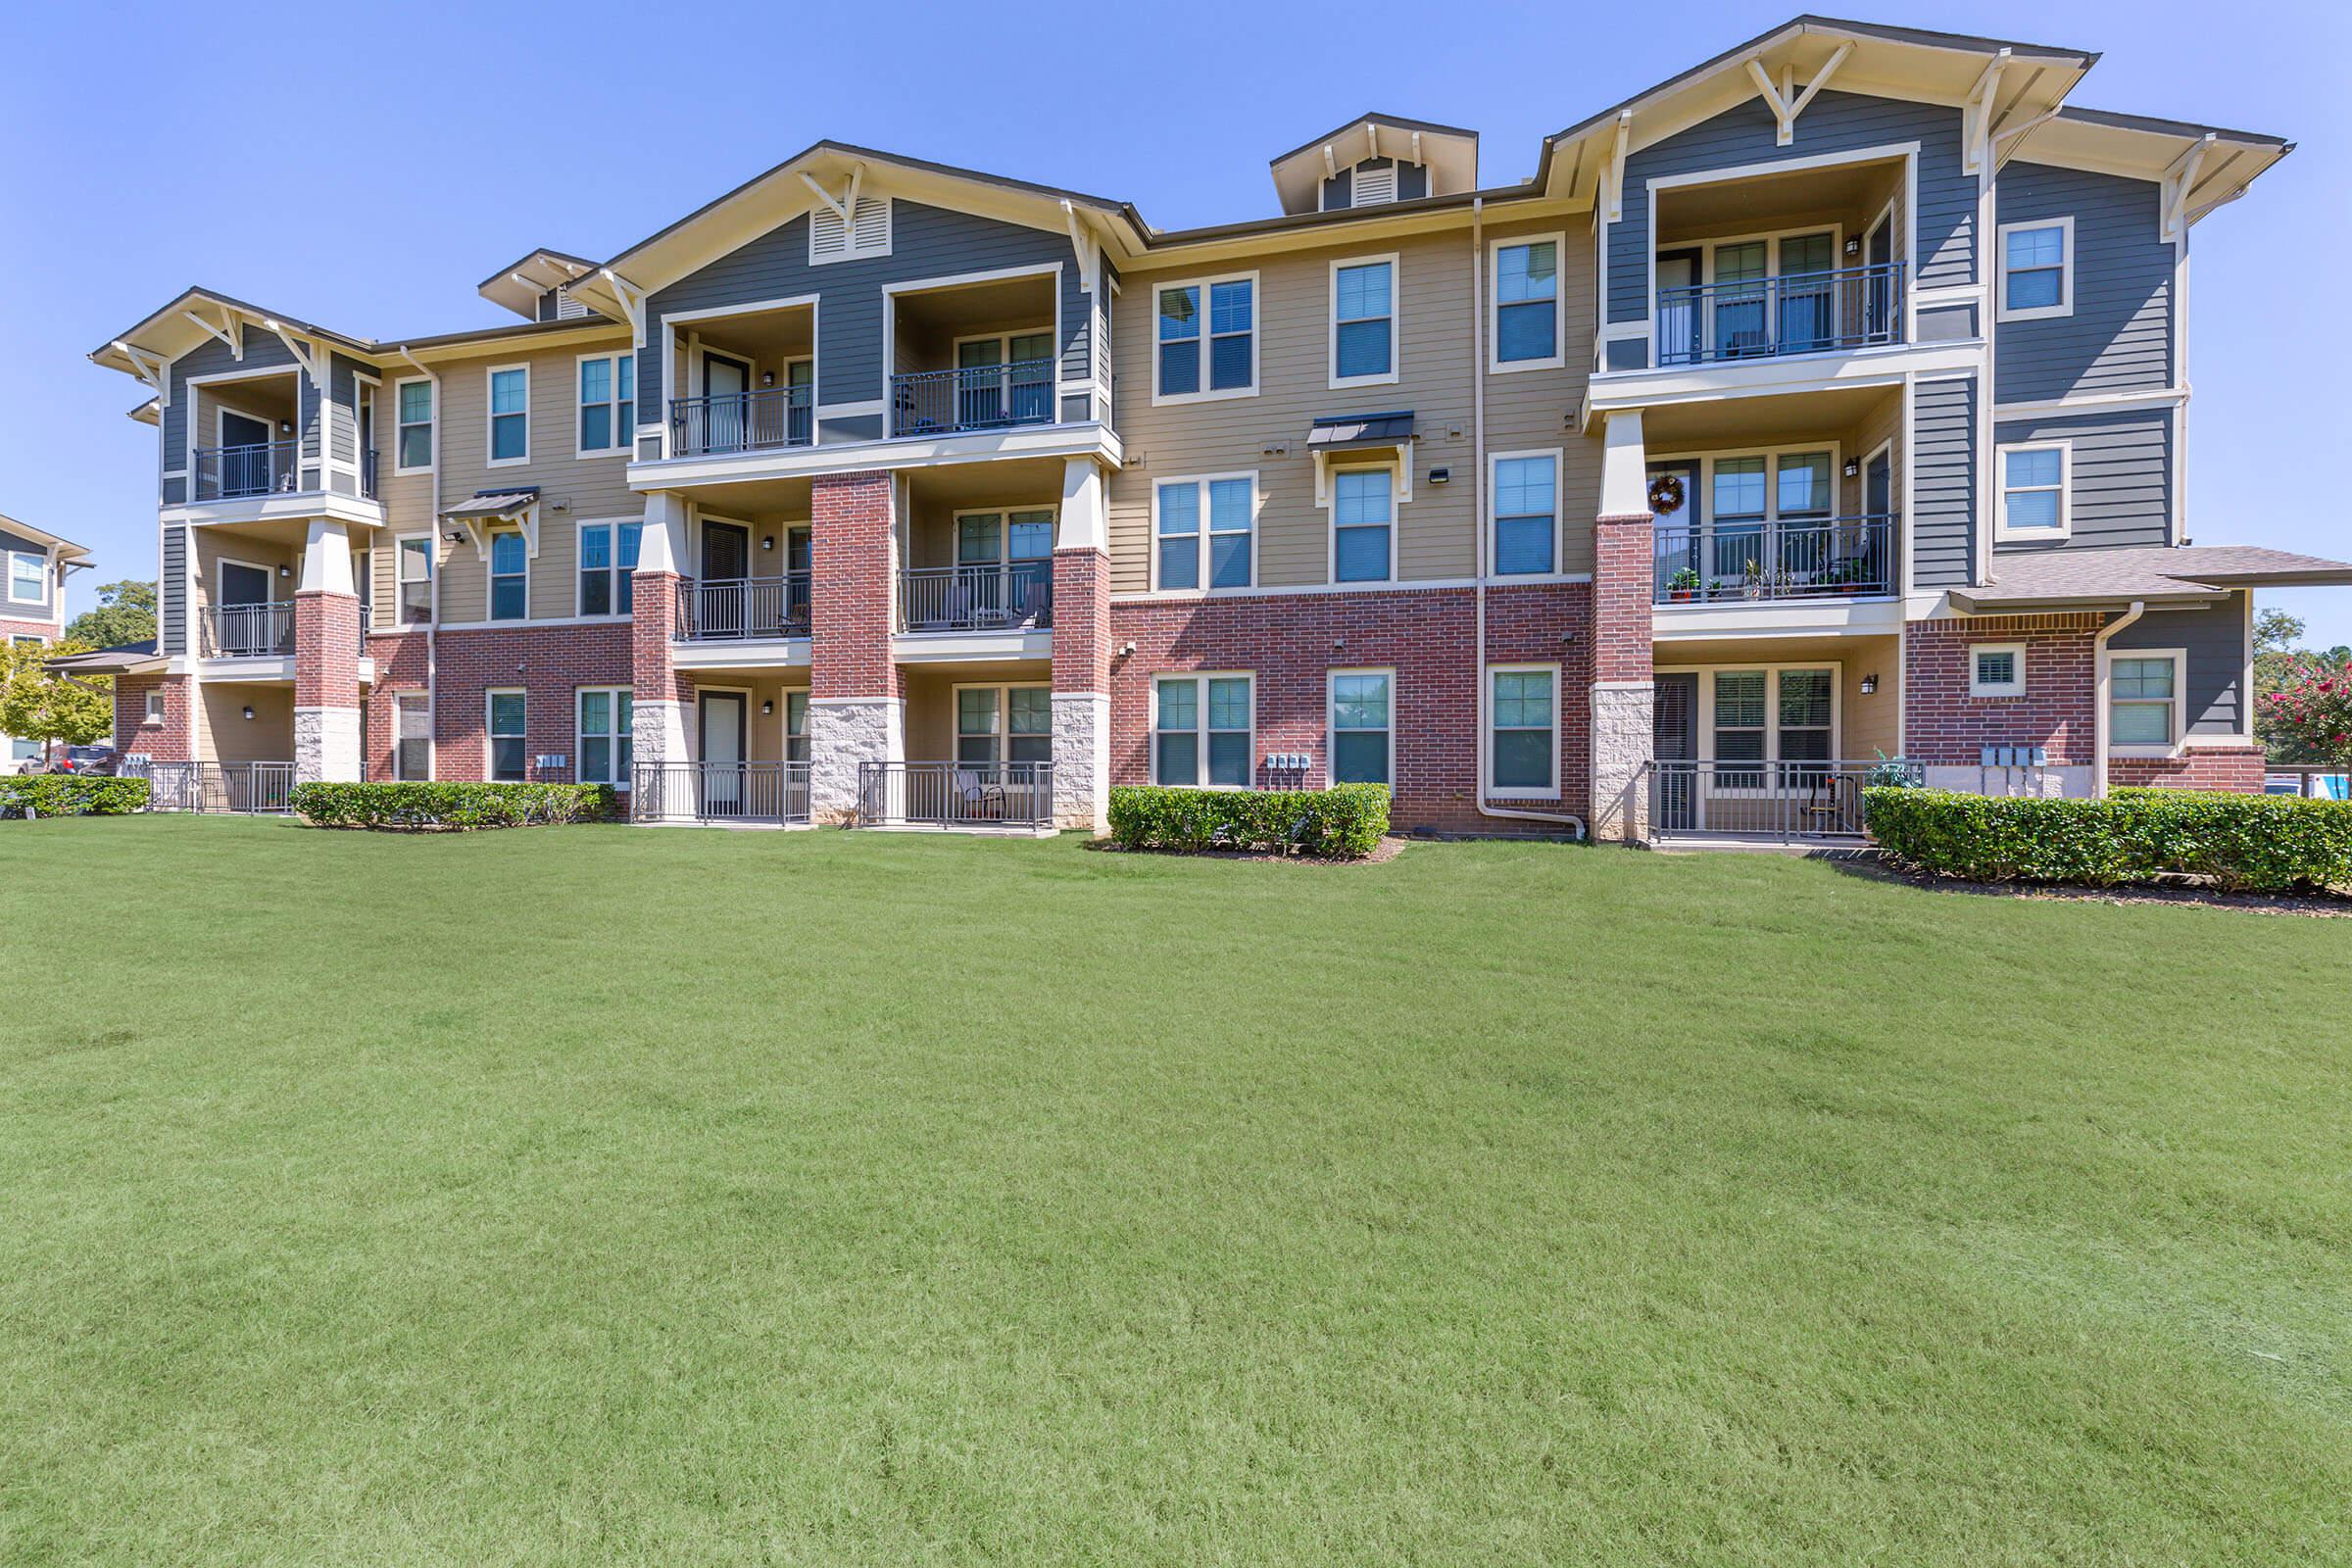 APARTMENT HOMES FOR RENT IN TYLER, TX